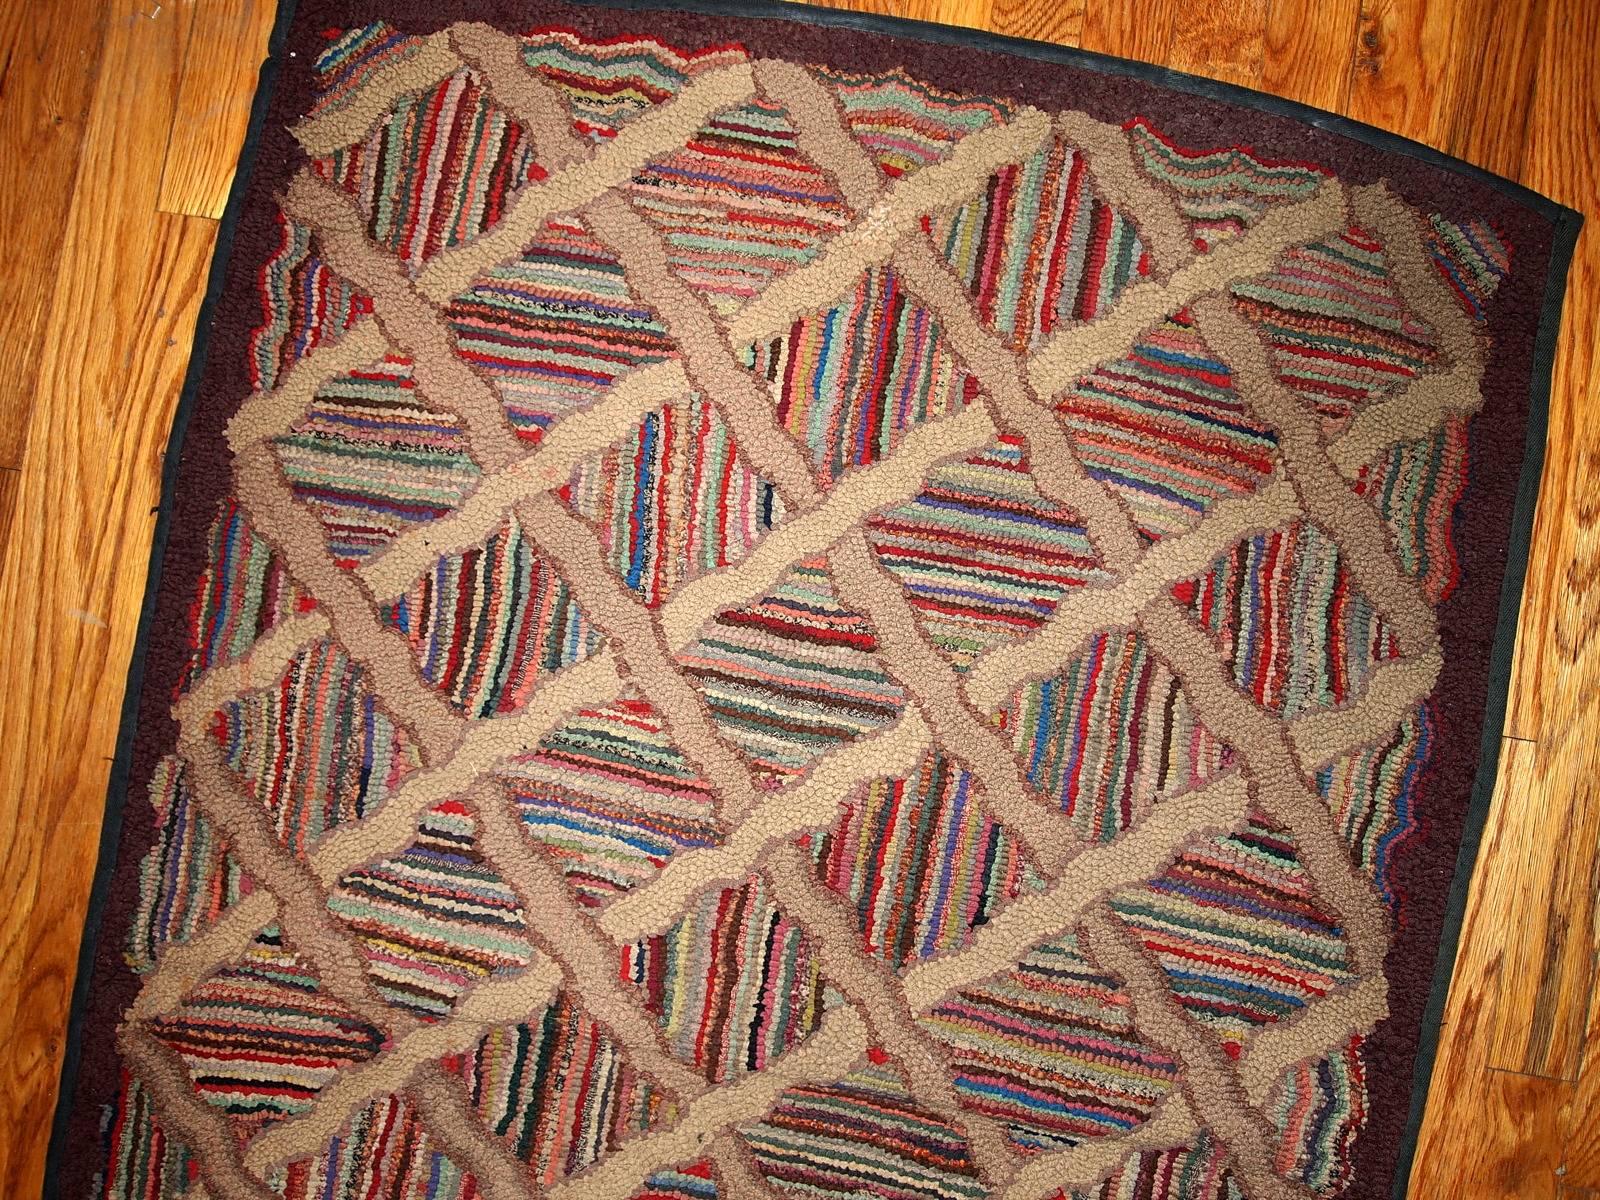 Antique hand-hooked American runner in original good condition. This rug was made in the end of 19th century in geometric design, which was not very usual for that time. The rug has colorful stripes all over it and larger diamond shaped mosaic